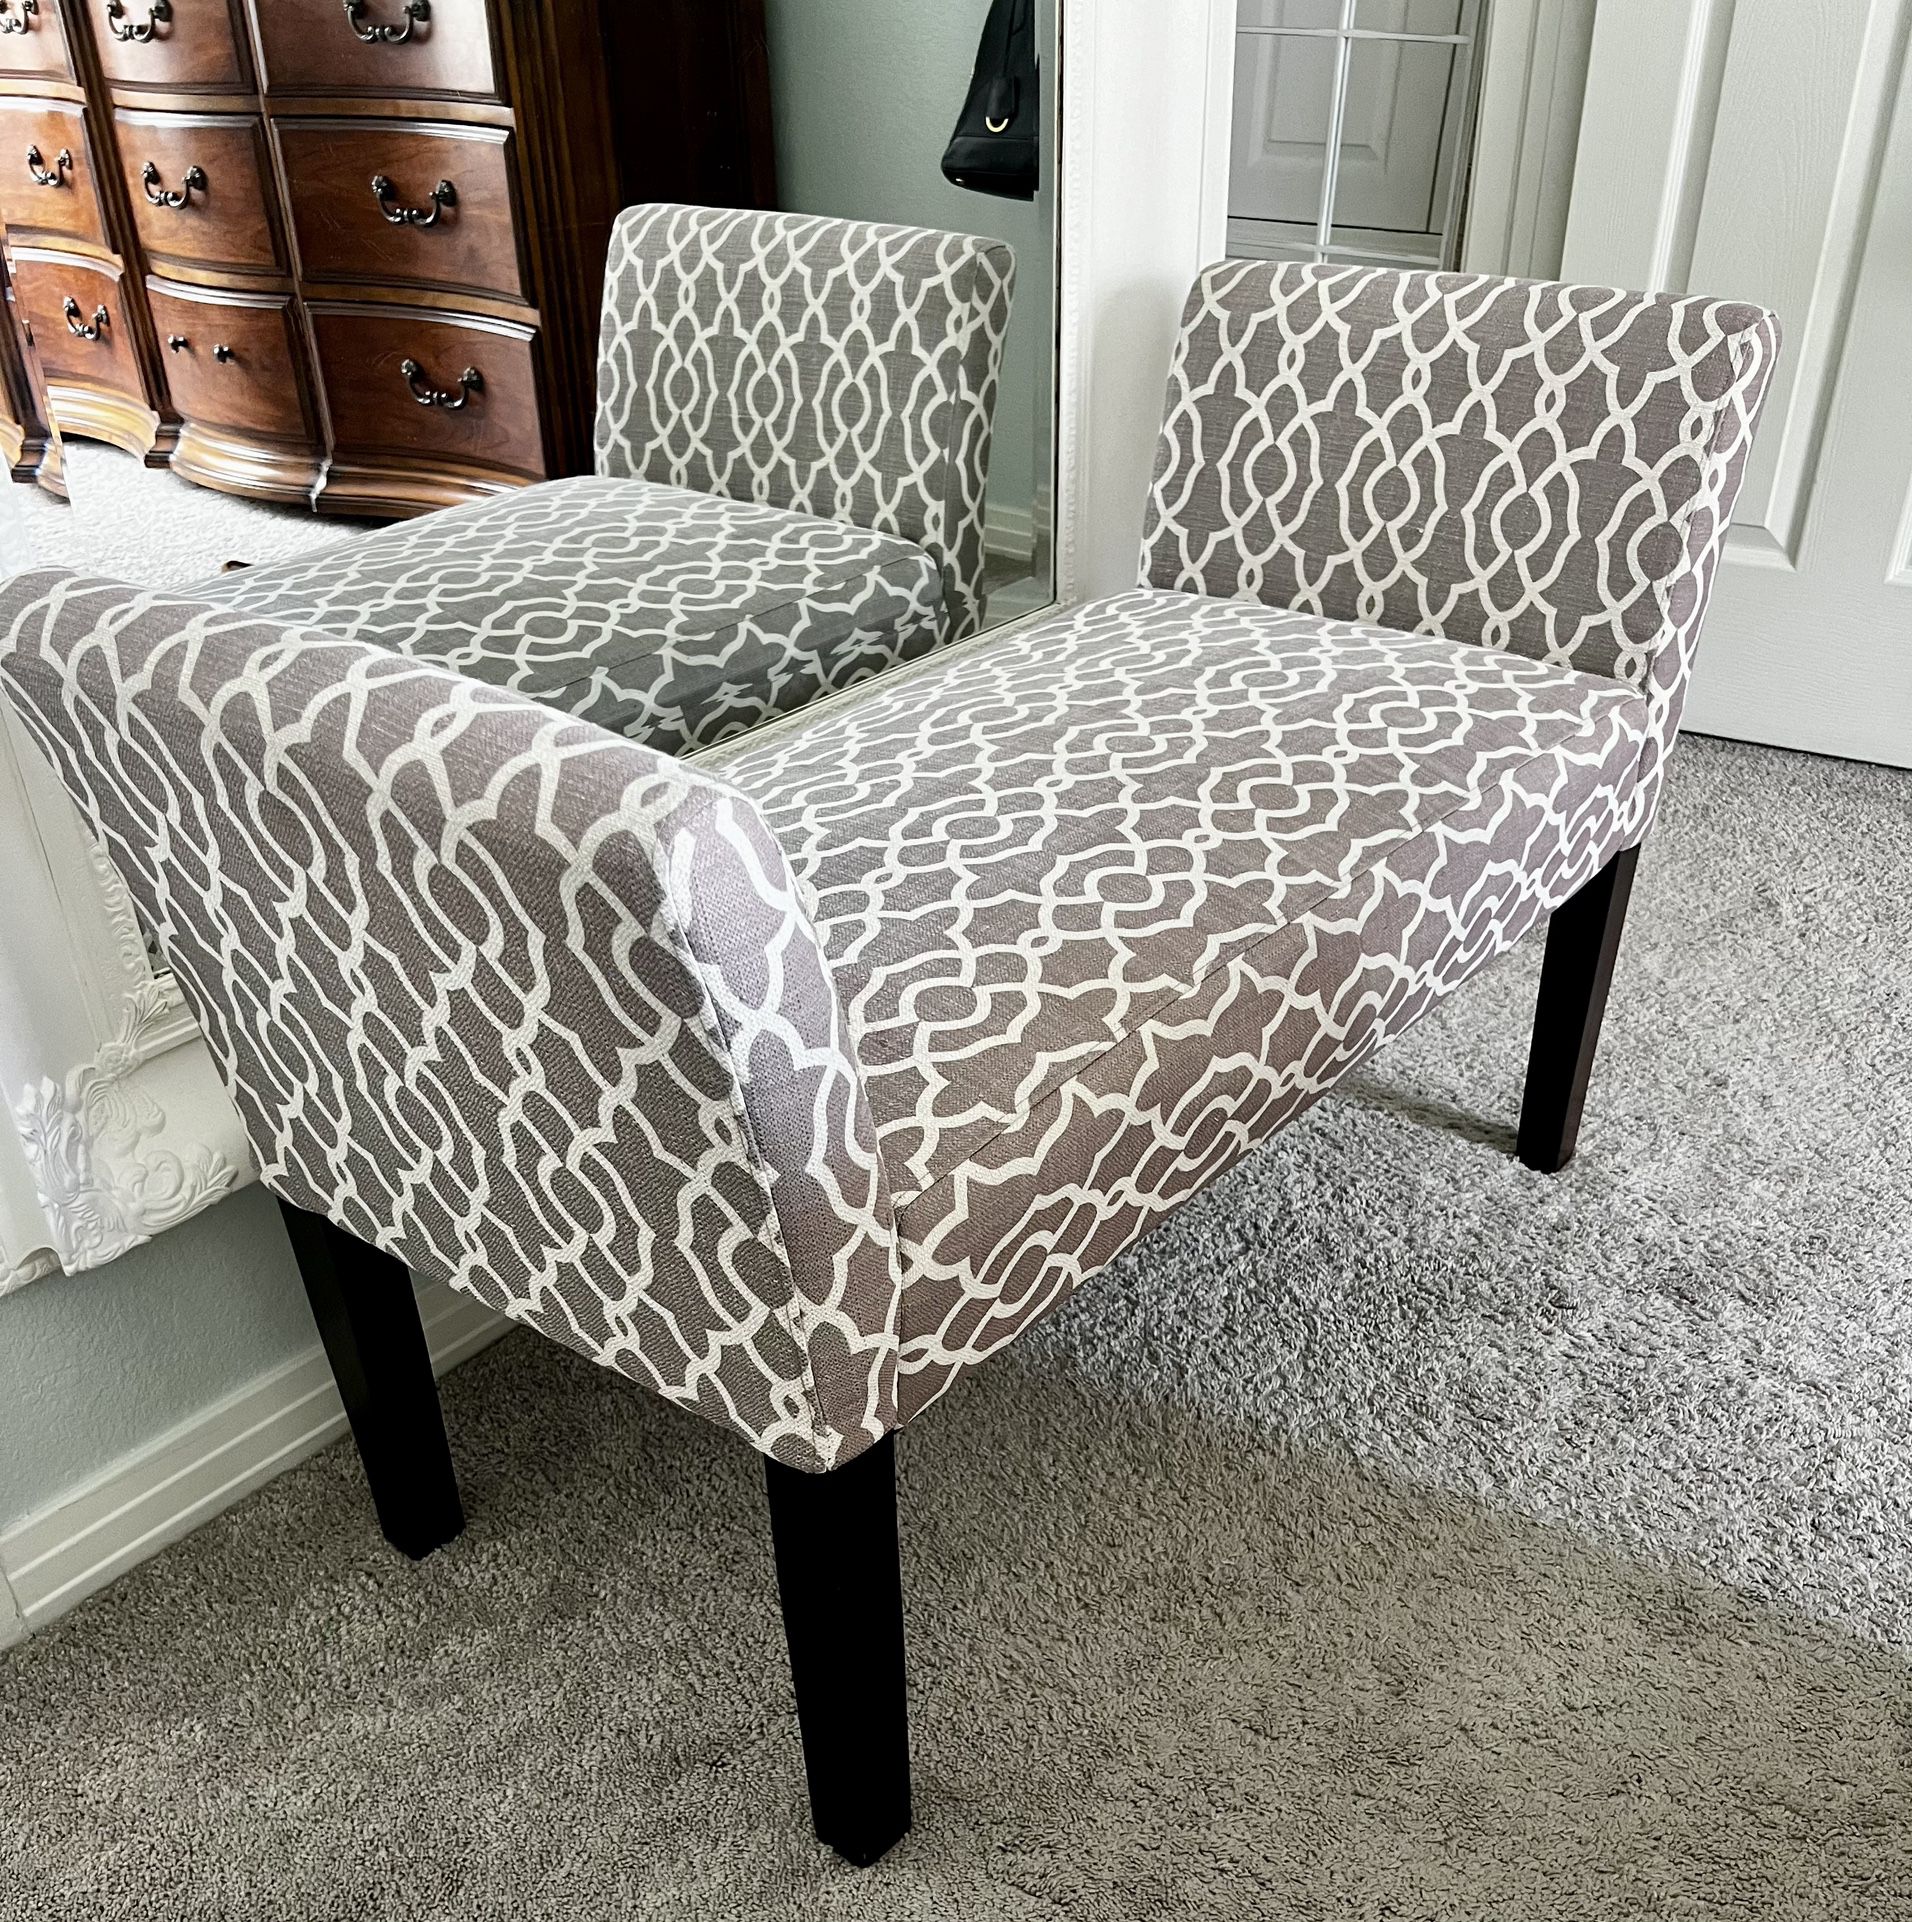 Upholstered Kelsey bench with flared side arms and deep seat design. Like-new condition. High performance, easy care fabric in a soft neutral gray geo